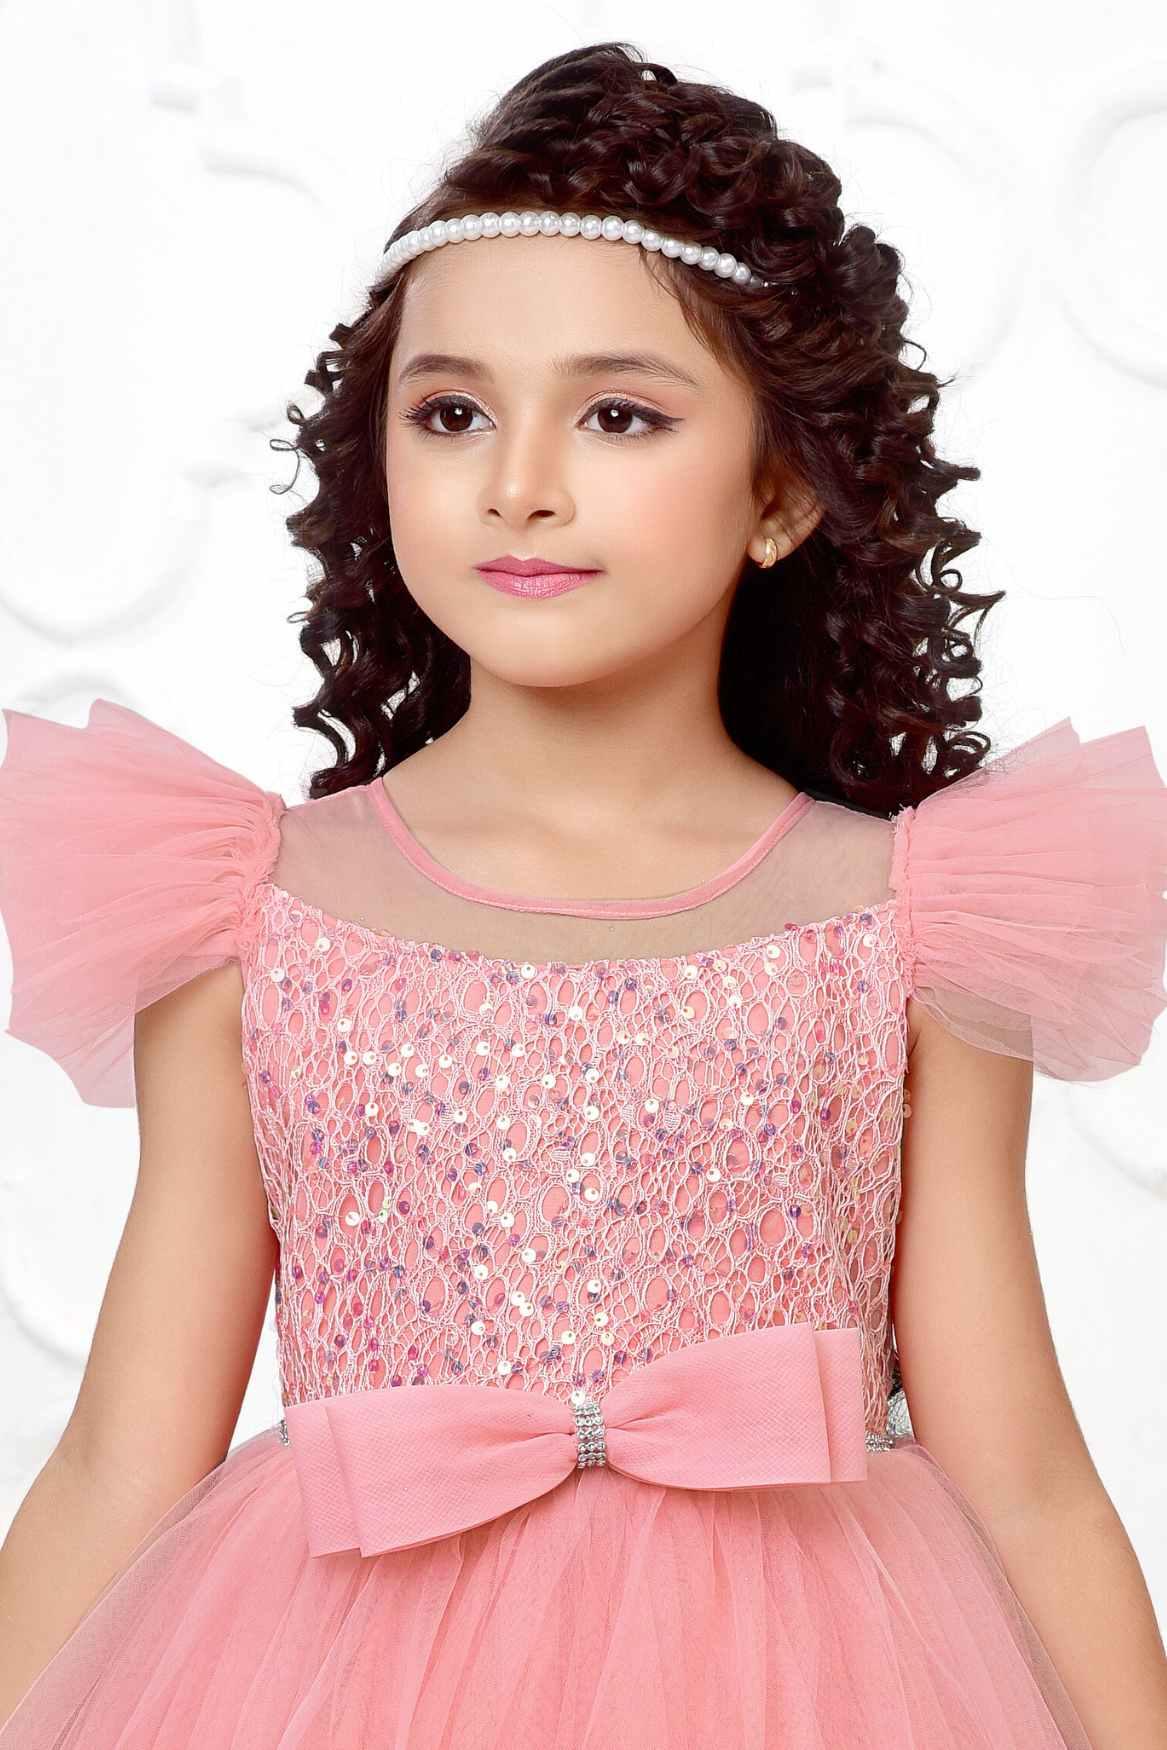 Peach Multilayered Ruffled Net Party Gown With Bow Embellishment For Girls - Lagorii Kids